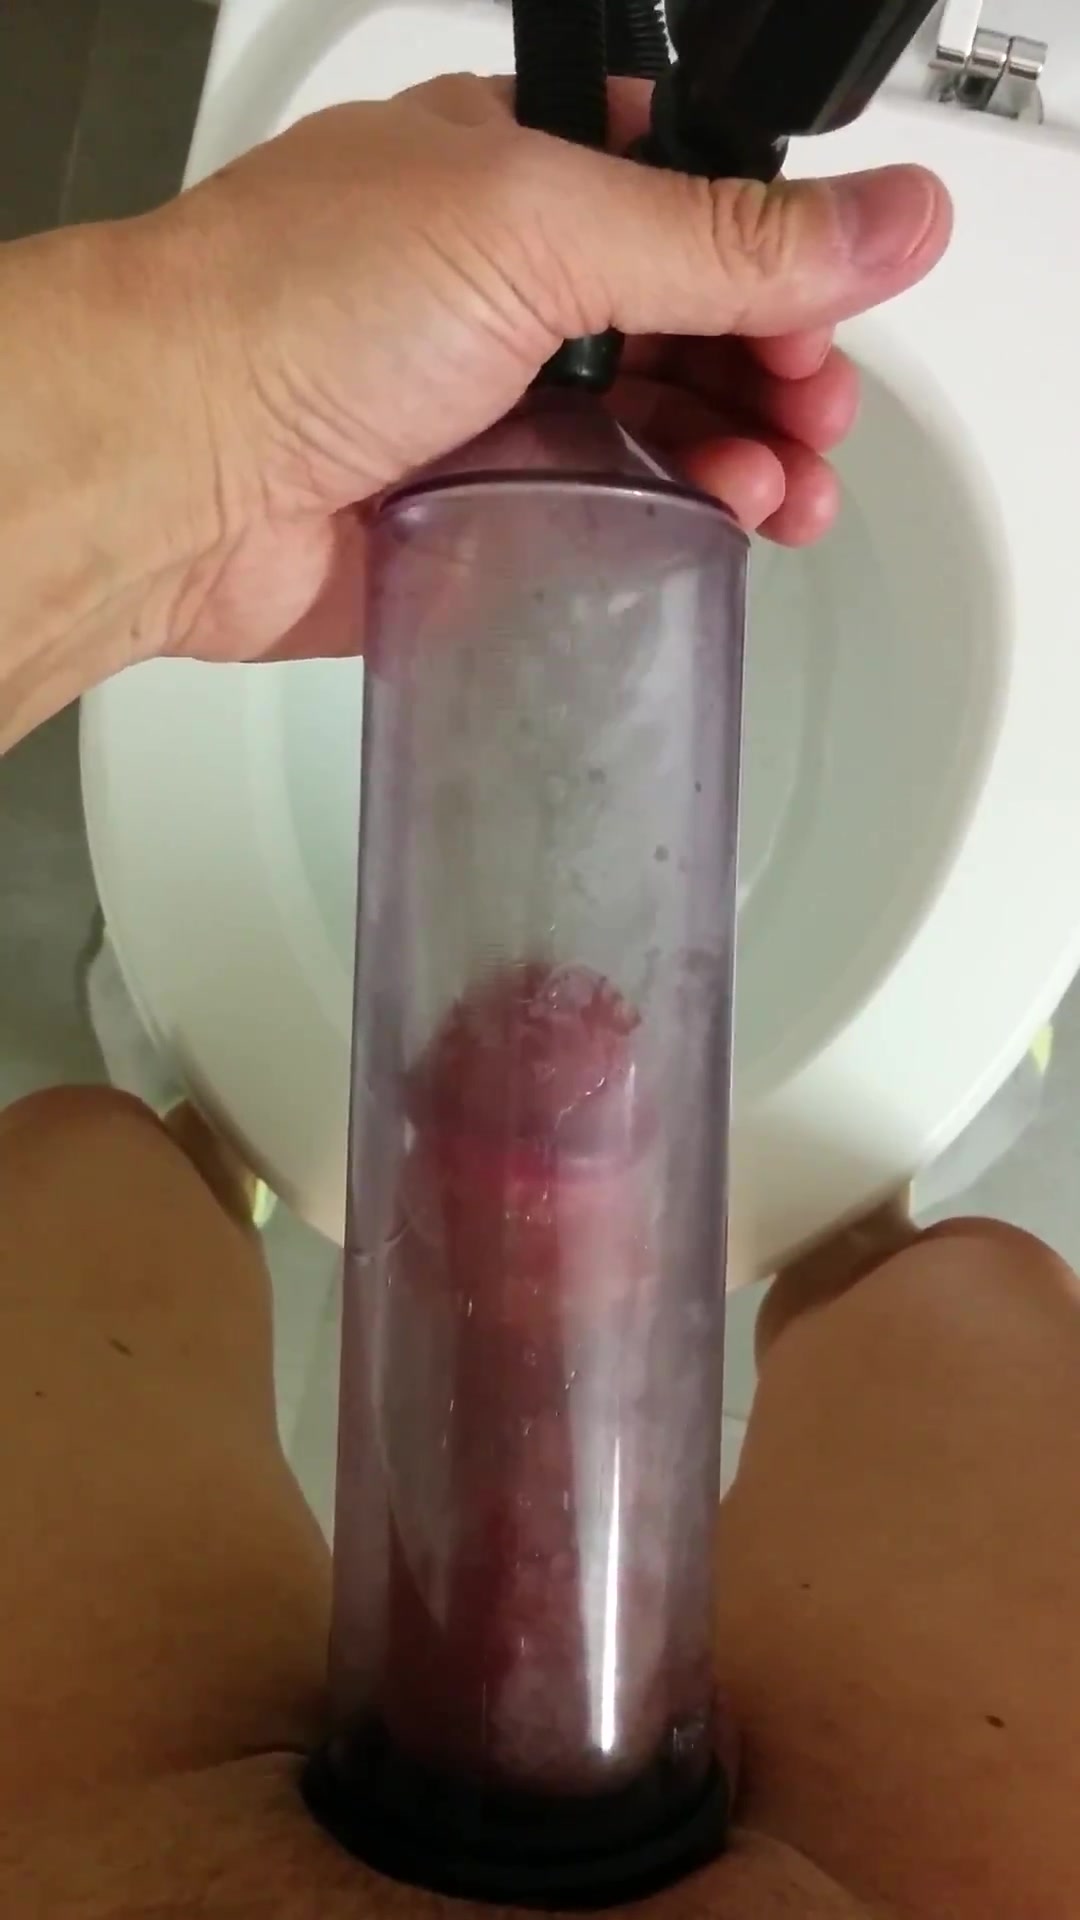 guy pumps his cock while pissing